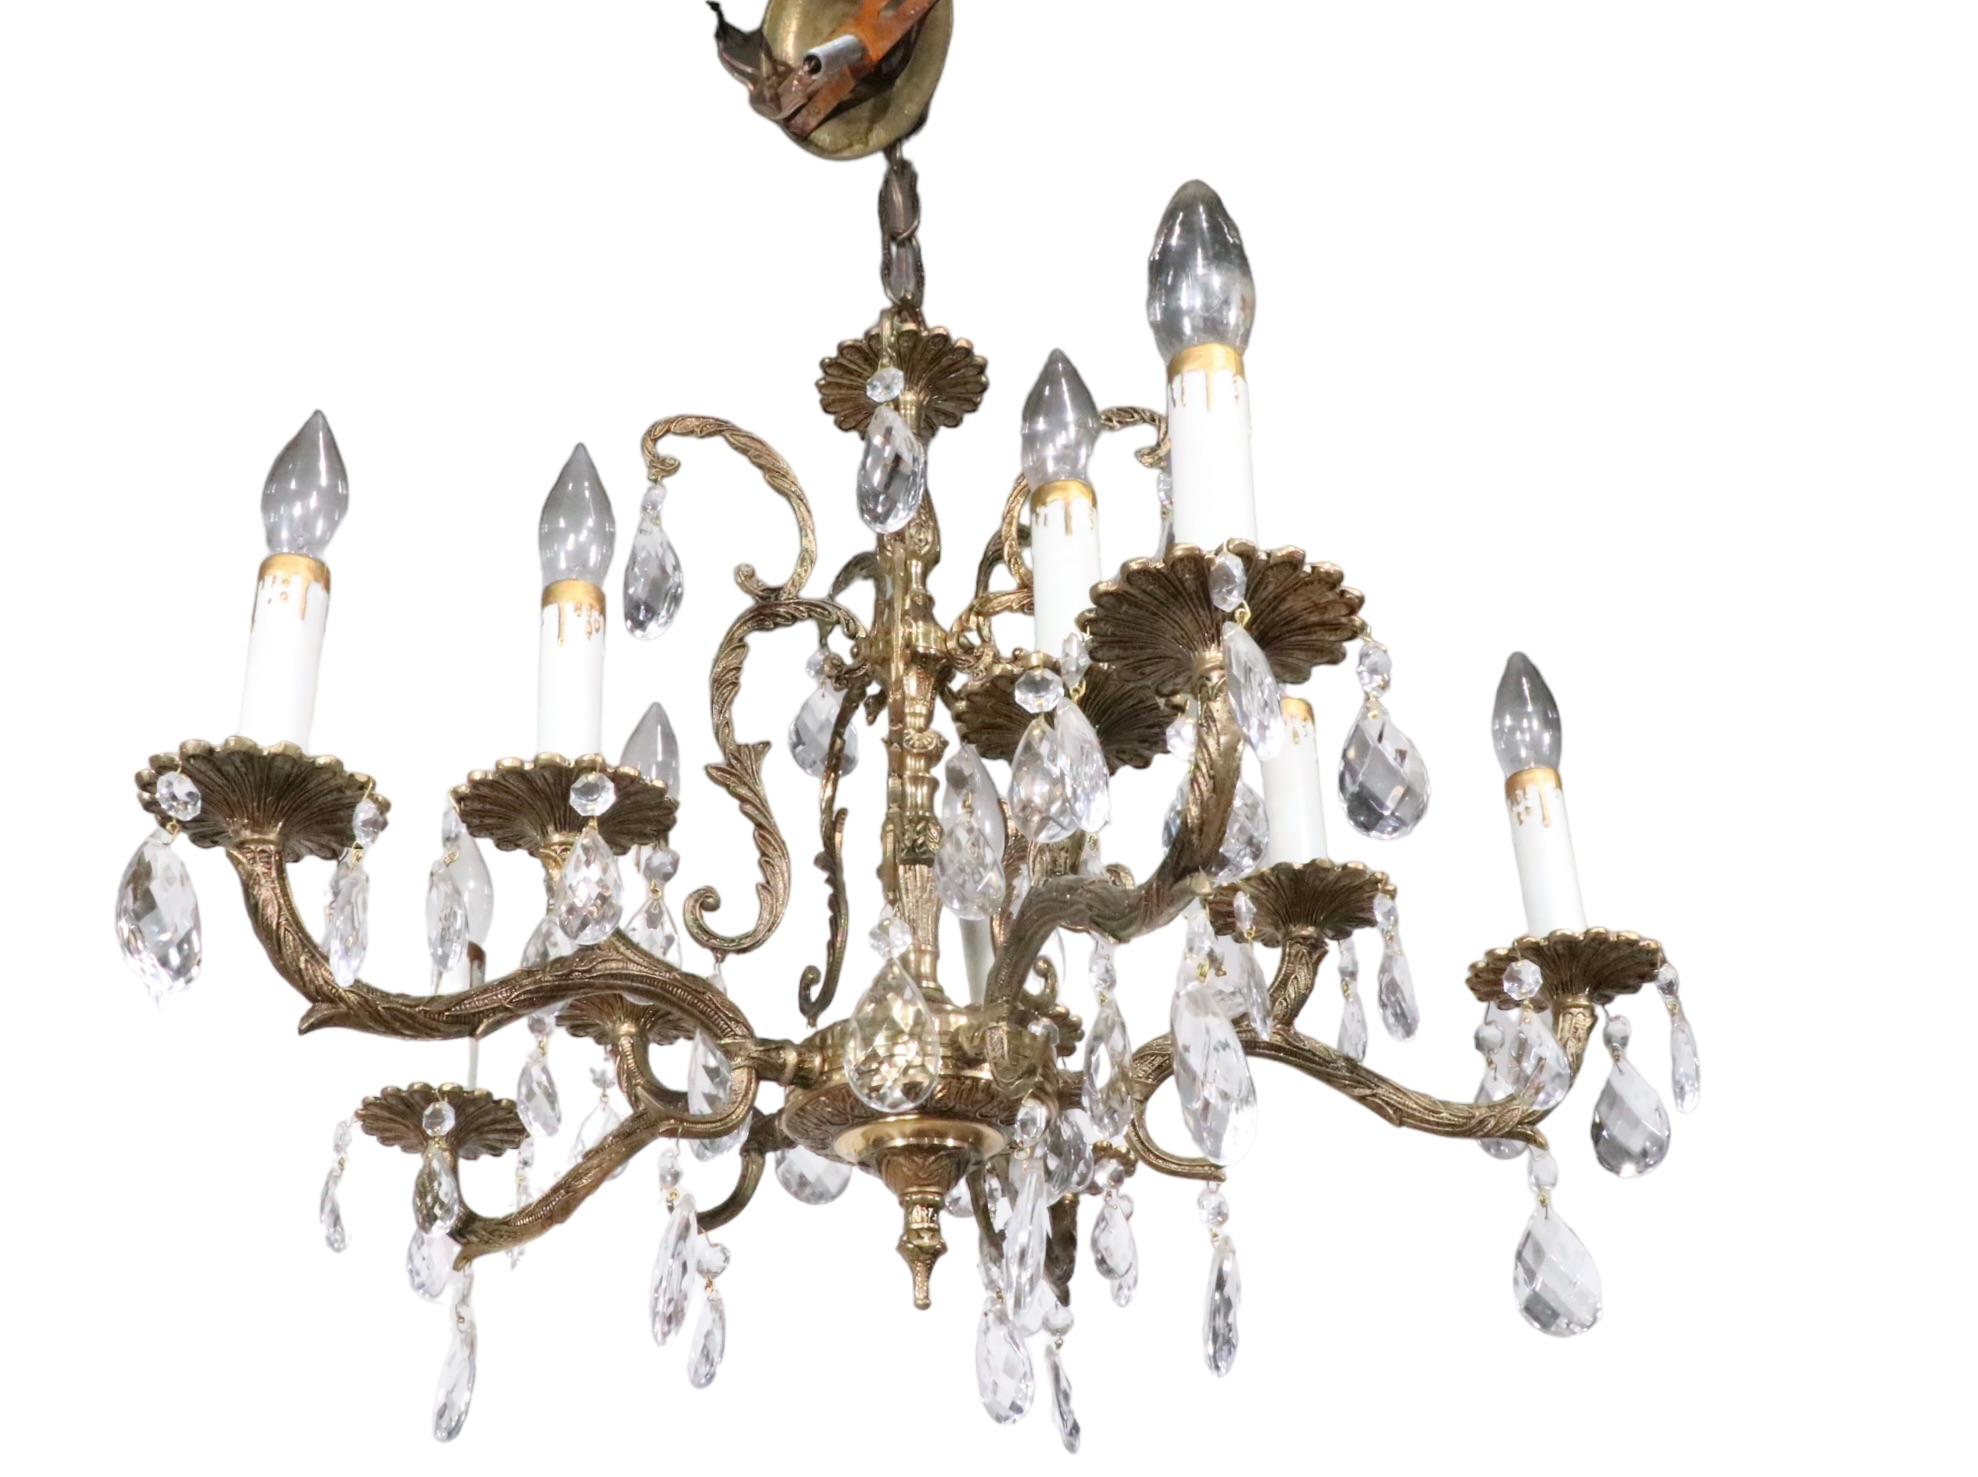 20th Century Ornate Cast Brass and Crystal  10 Light Chandelier Made in Spain c 1950's For Sale